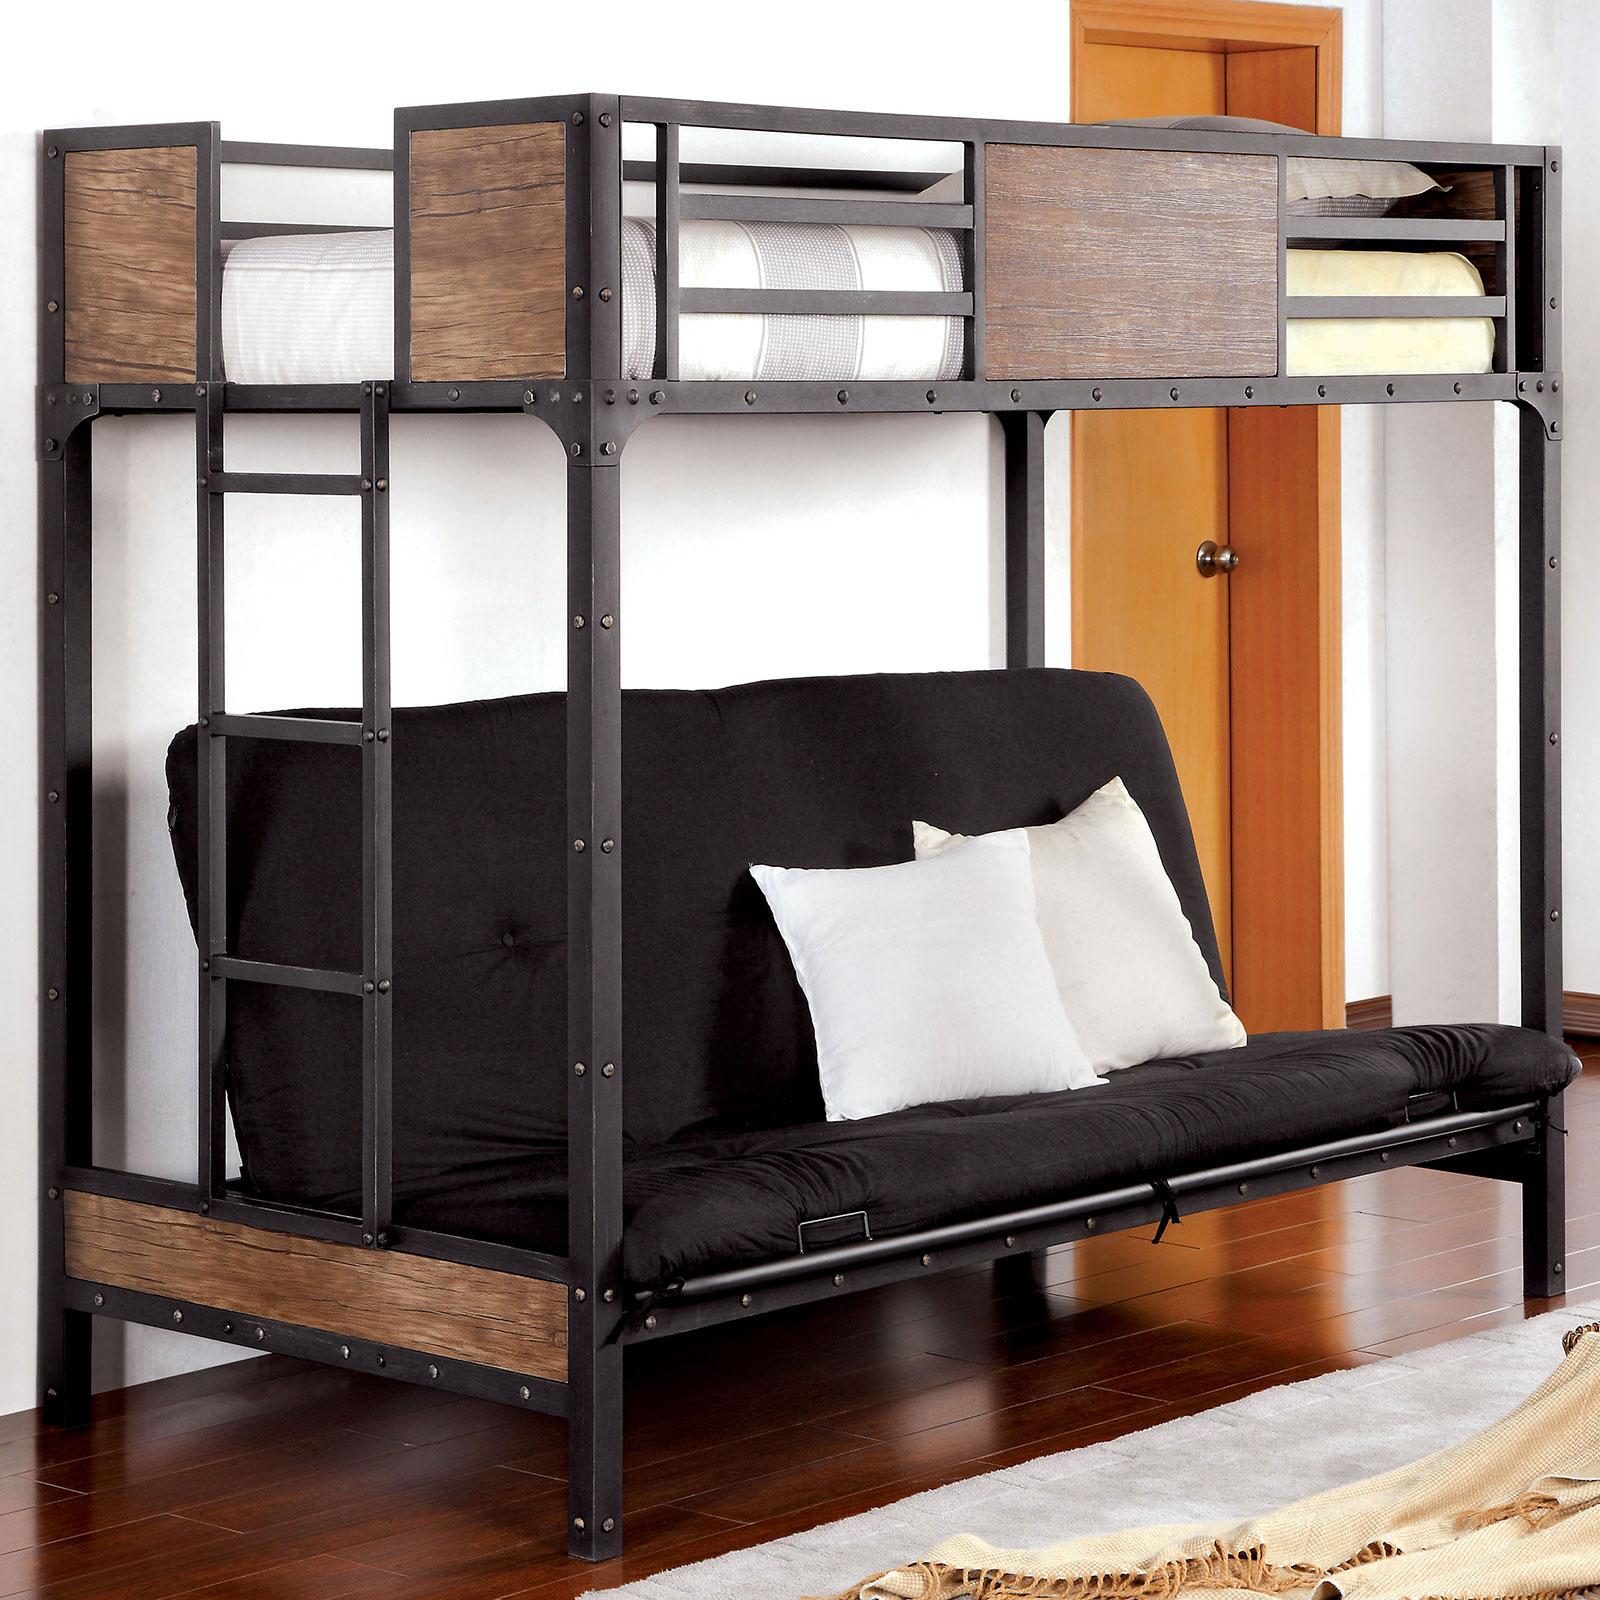 Furniture of America CLAPTON CM-BK029TS Bunk Bed